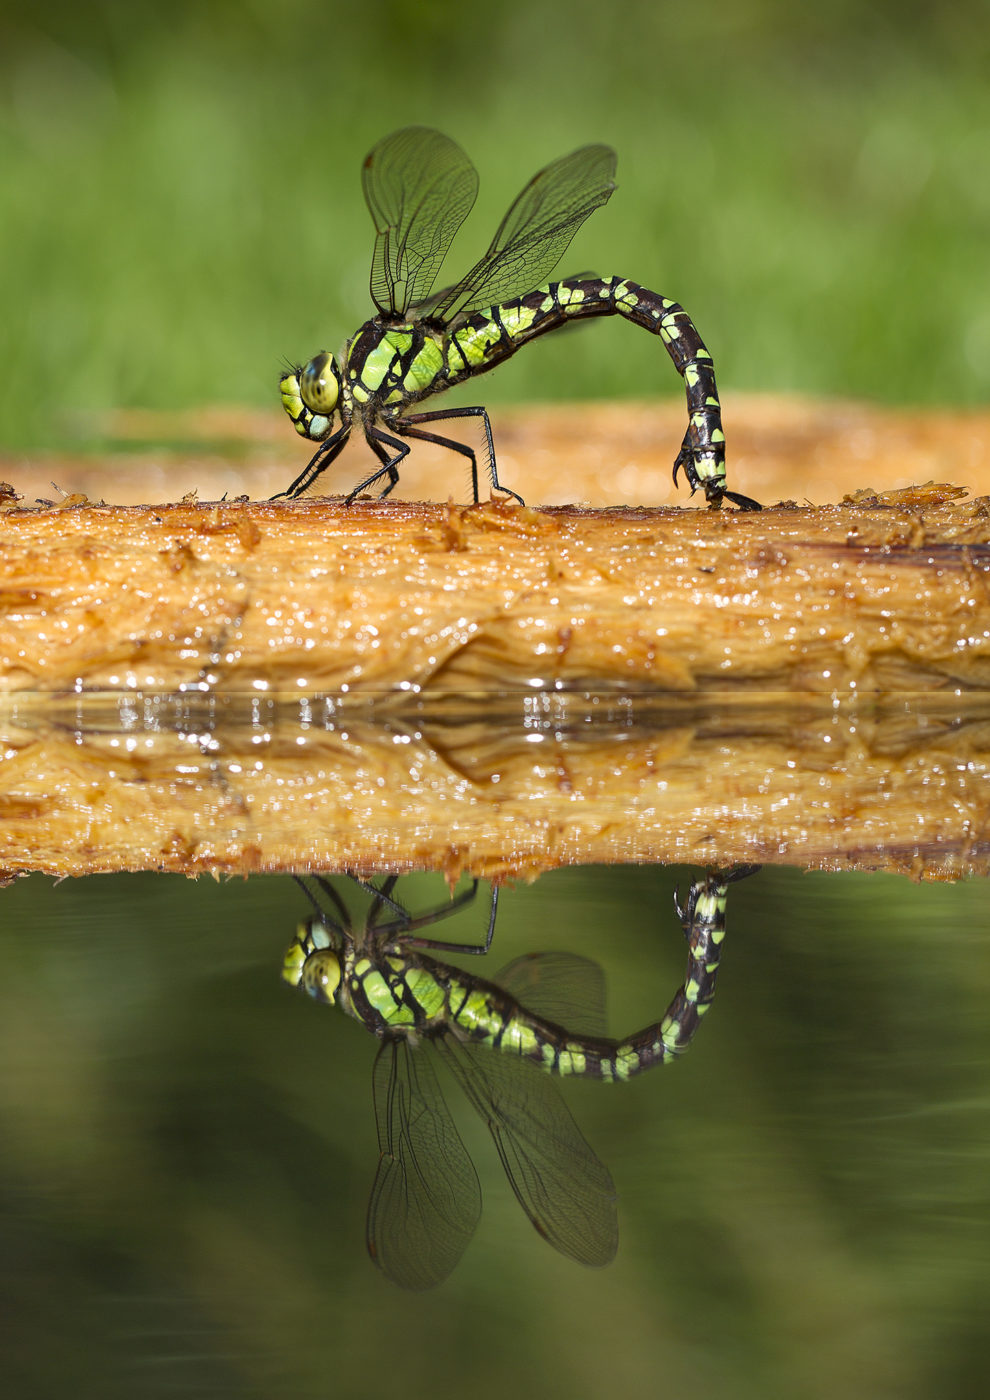 Female southern hawker dragonfly, Aeshna cyanea, ovipositing on rotten log, reflected in water